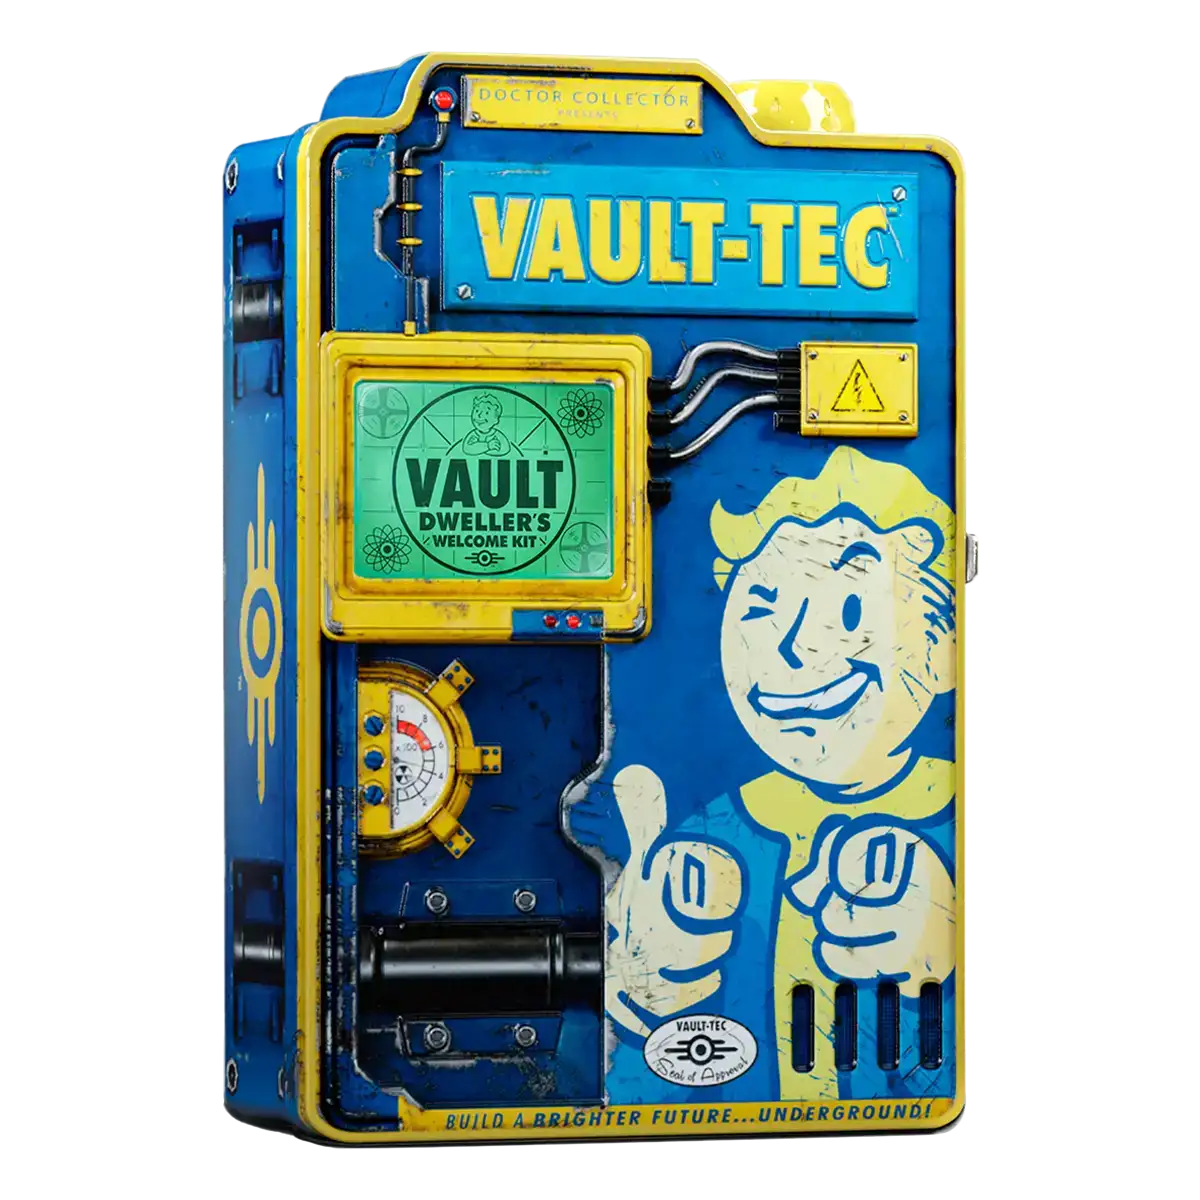 Fallout "Vault Dweller´s Wecome Kit"